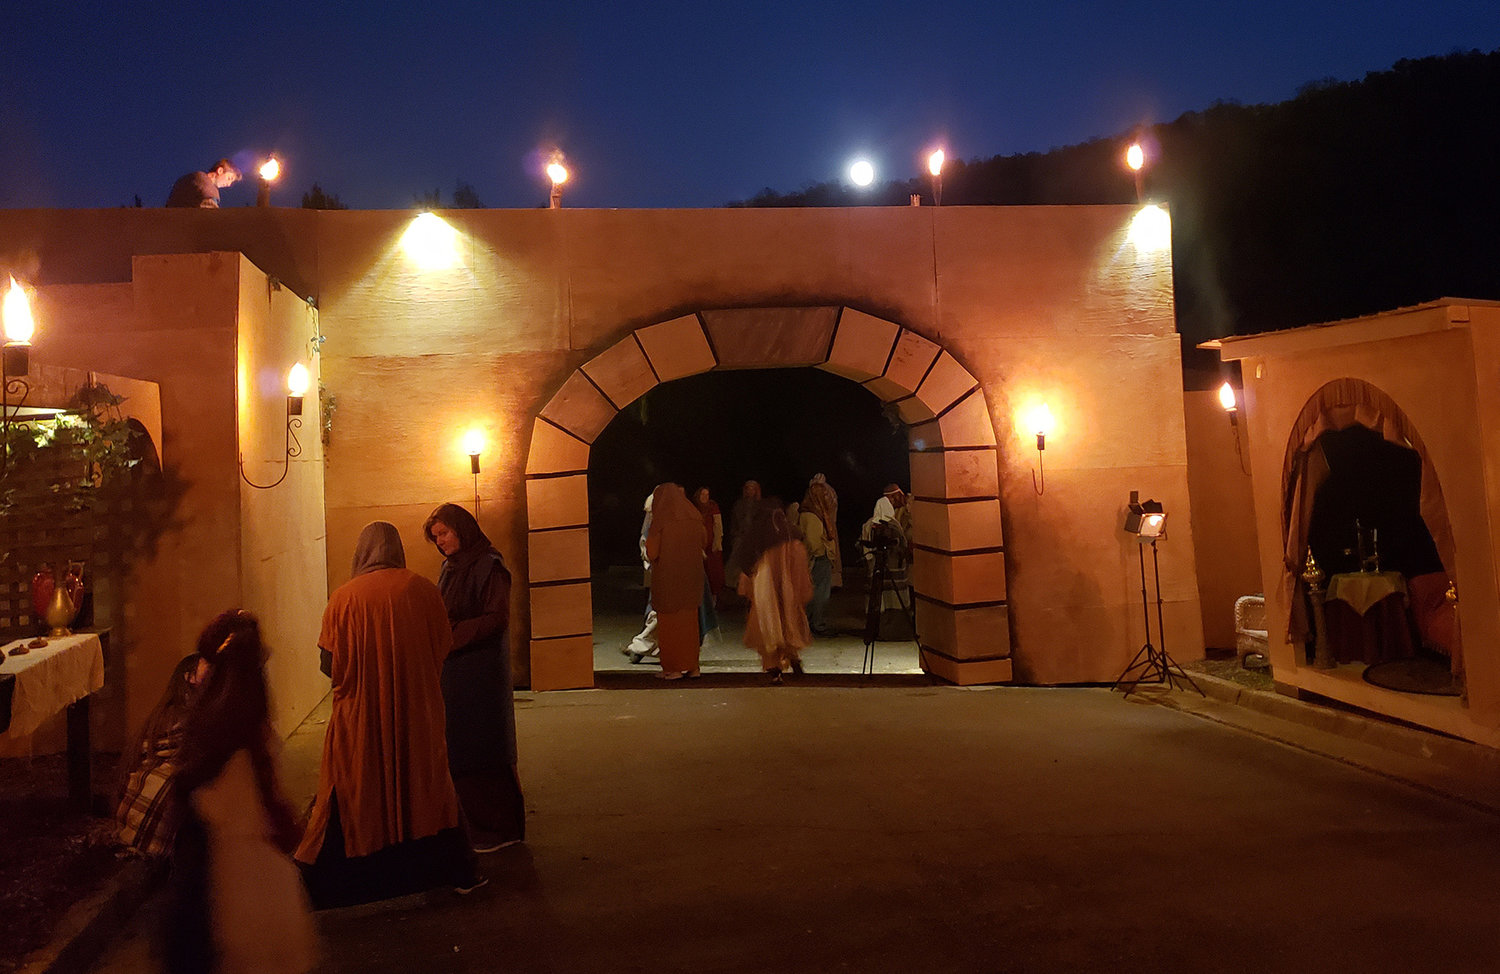 The gate to the village of Bethlehem is illuminated during a prior year's production of the Legacy of Bethlehem at Legacy Baptist Church in Dallas, Ga. (Photo/Courtesy Jim Yearwood)